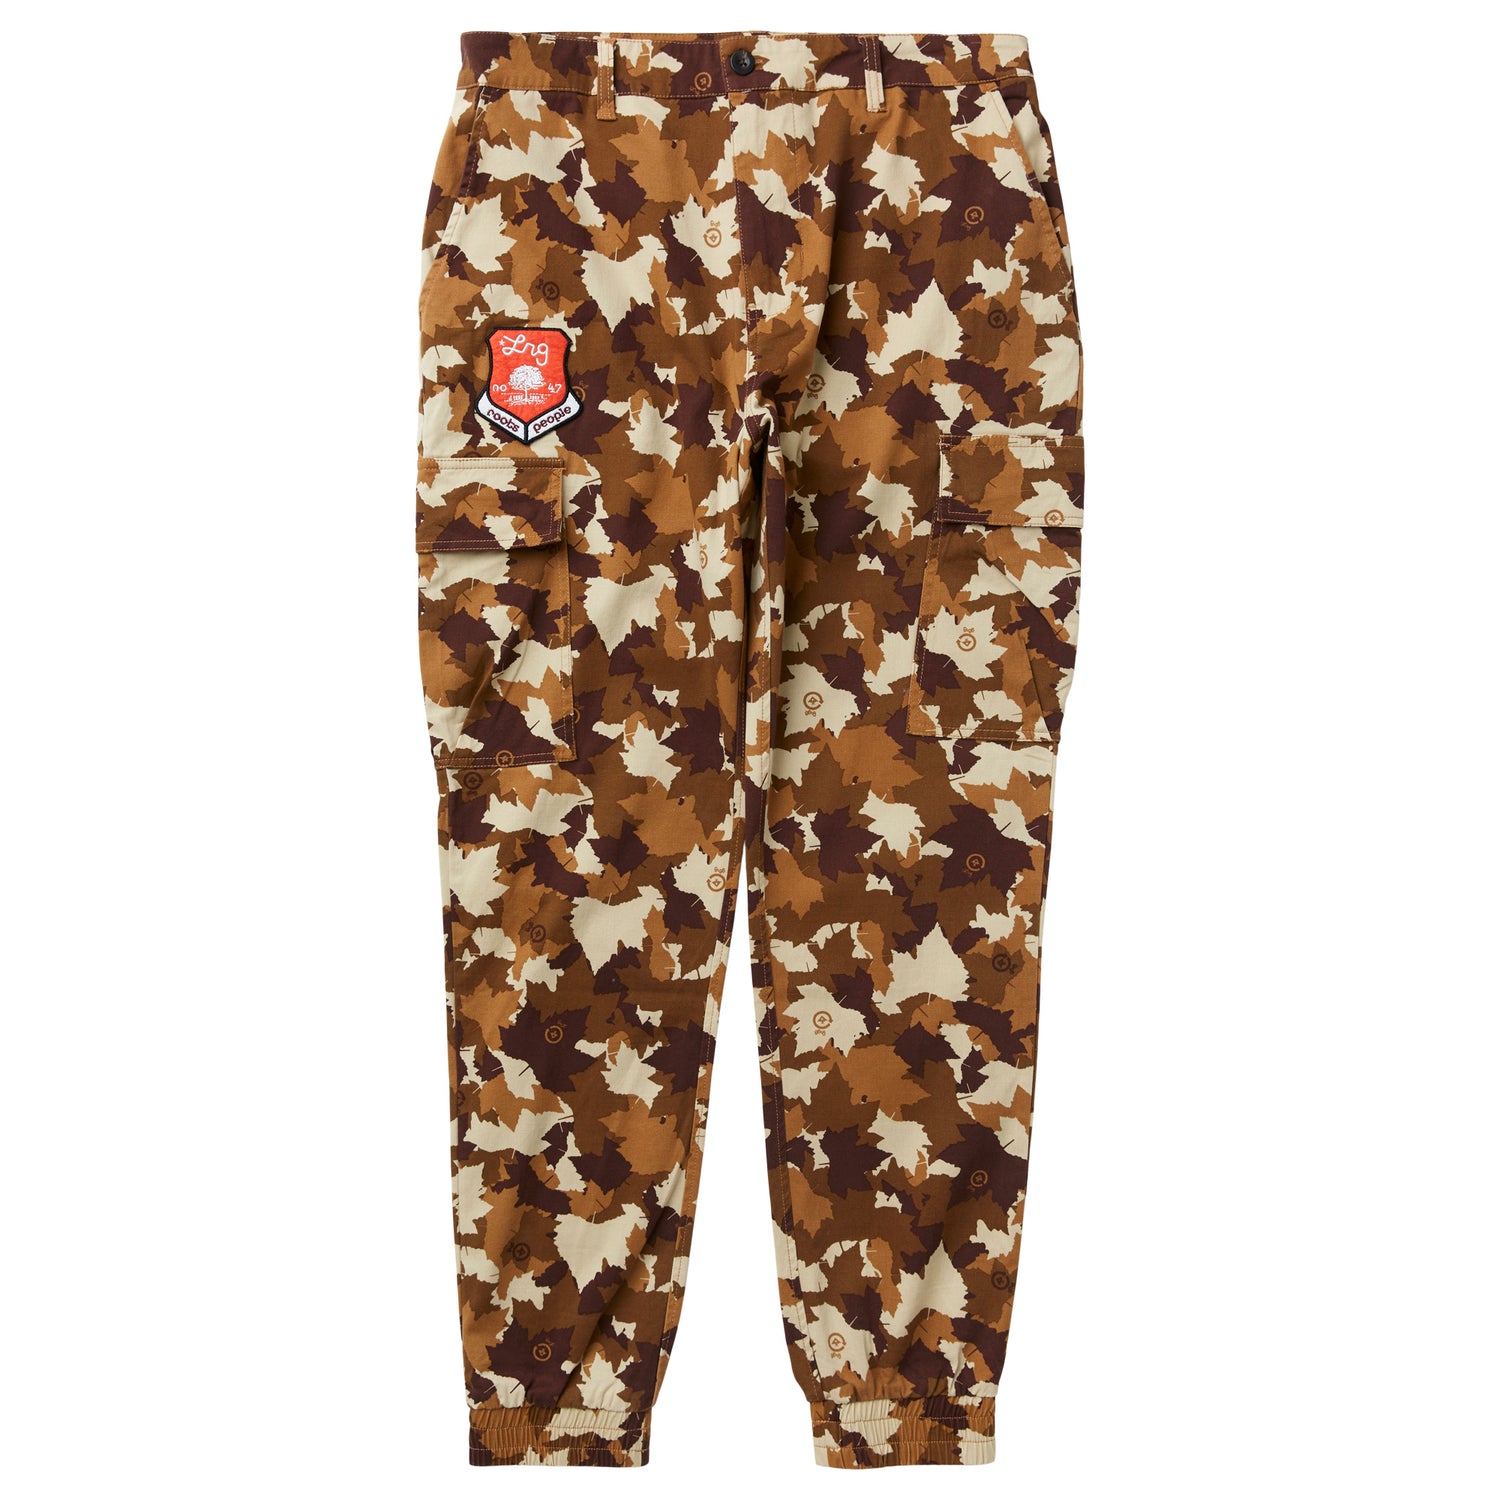 OUTDOOR LIFE CARGO PANT - BROWN MAPLE LEAF CAMO